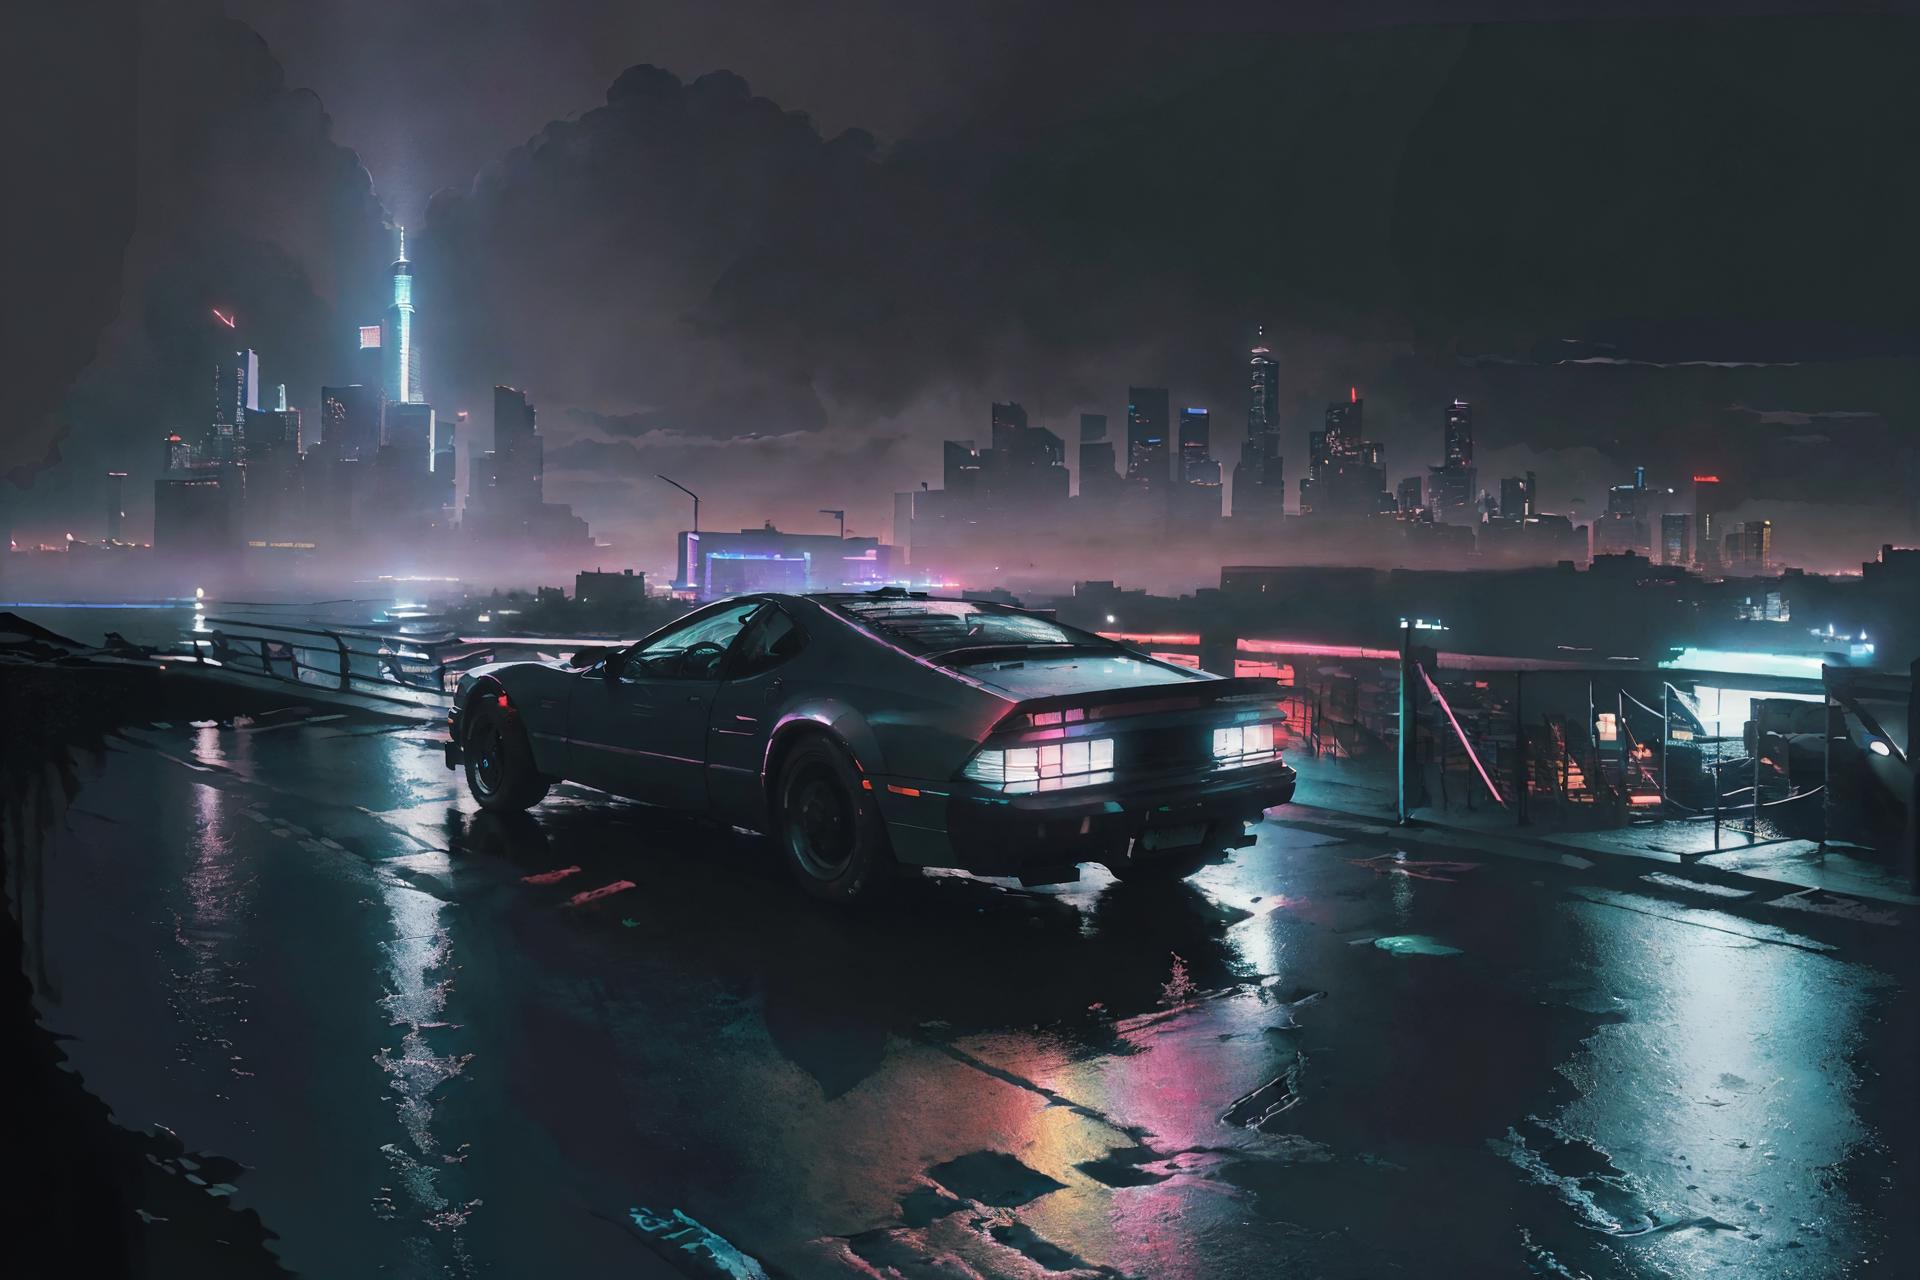 Retrowave image by shefchenko